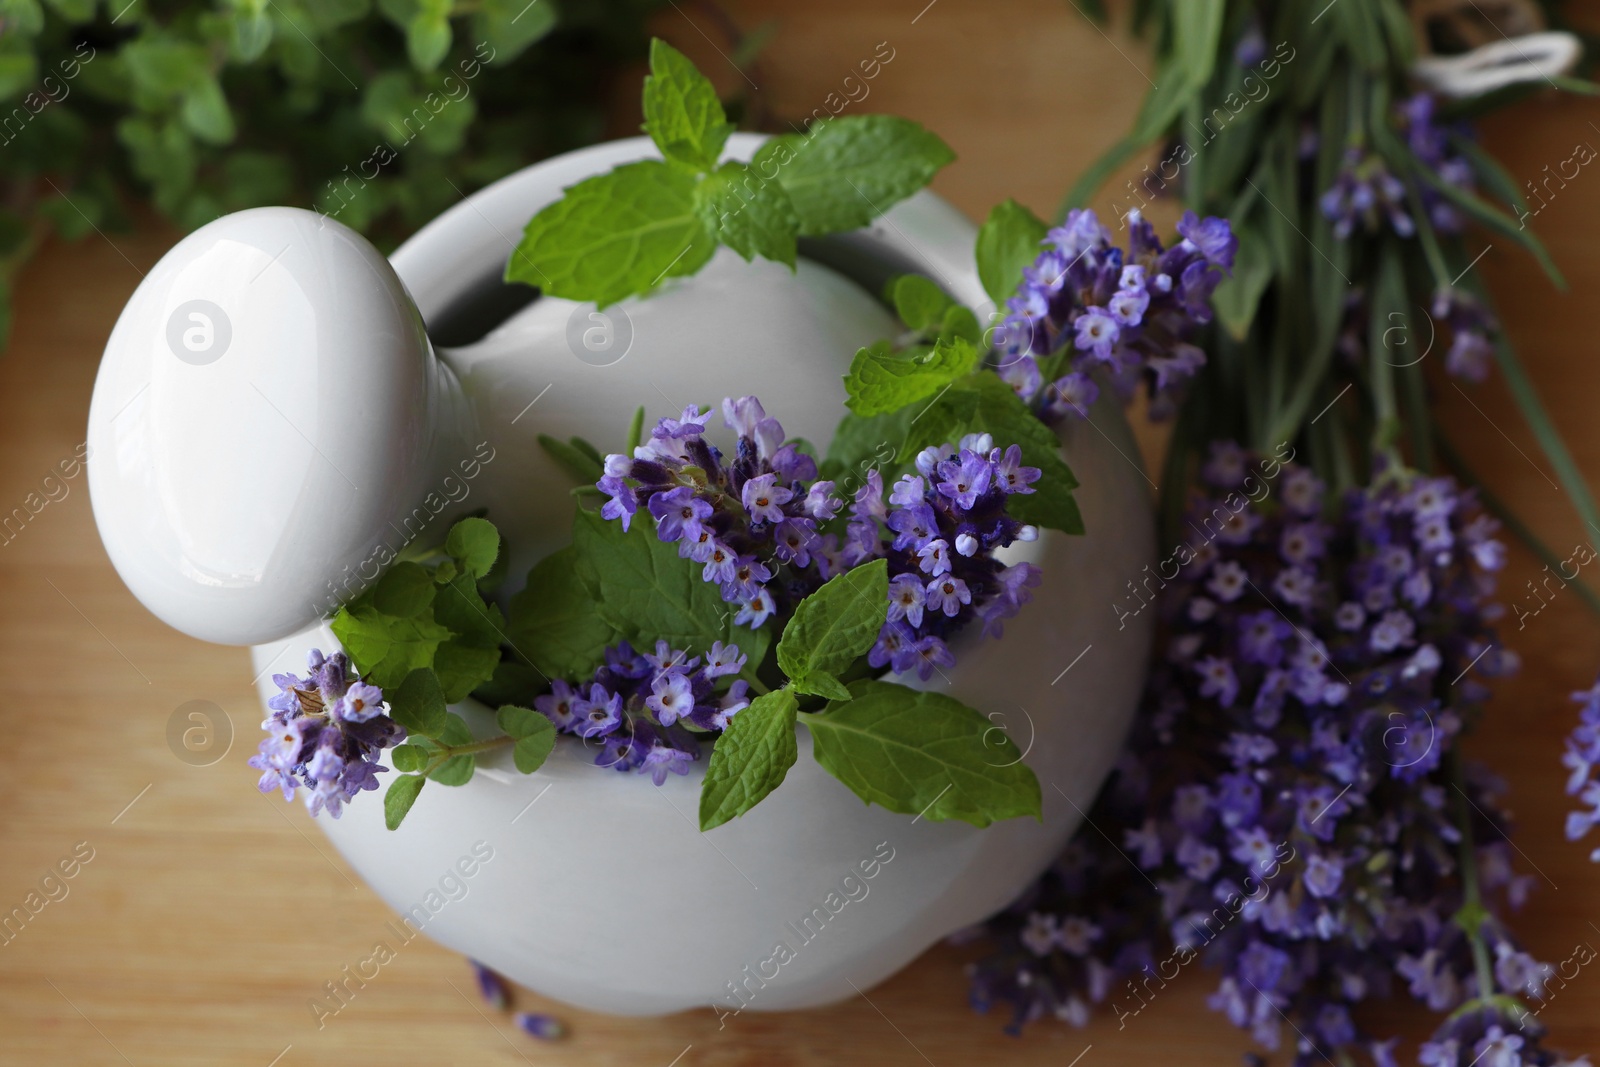 Photo of Mortar with fresh lavender flowers, mint and pestle on wooden table, closeup